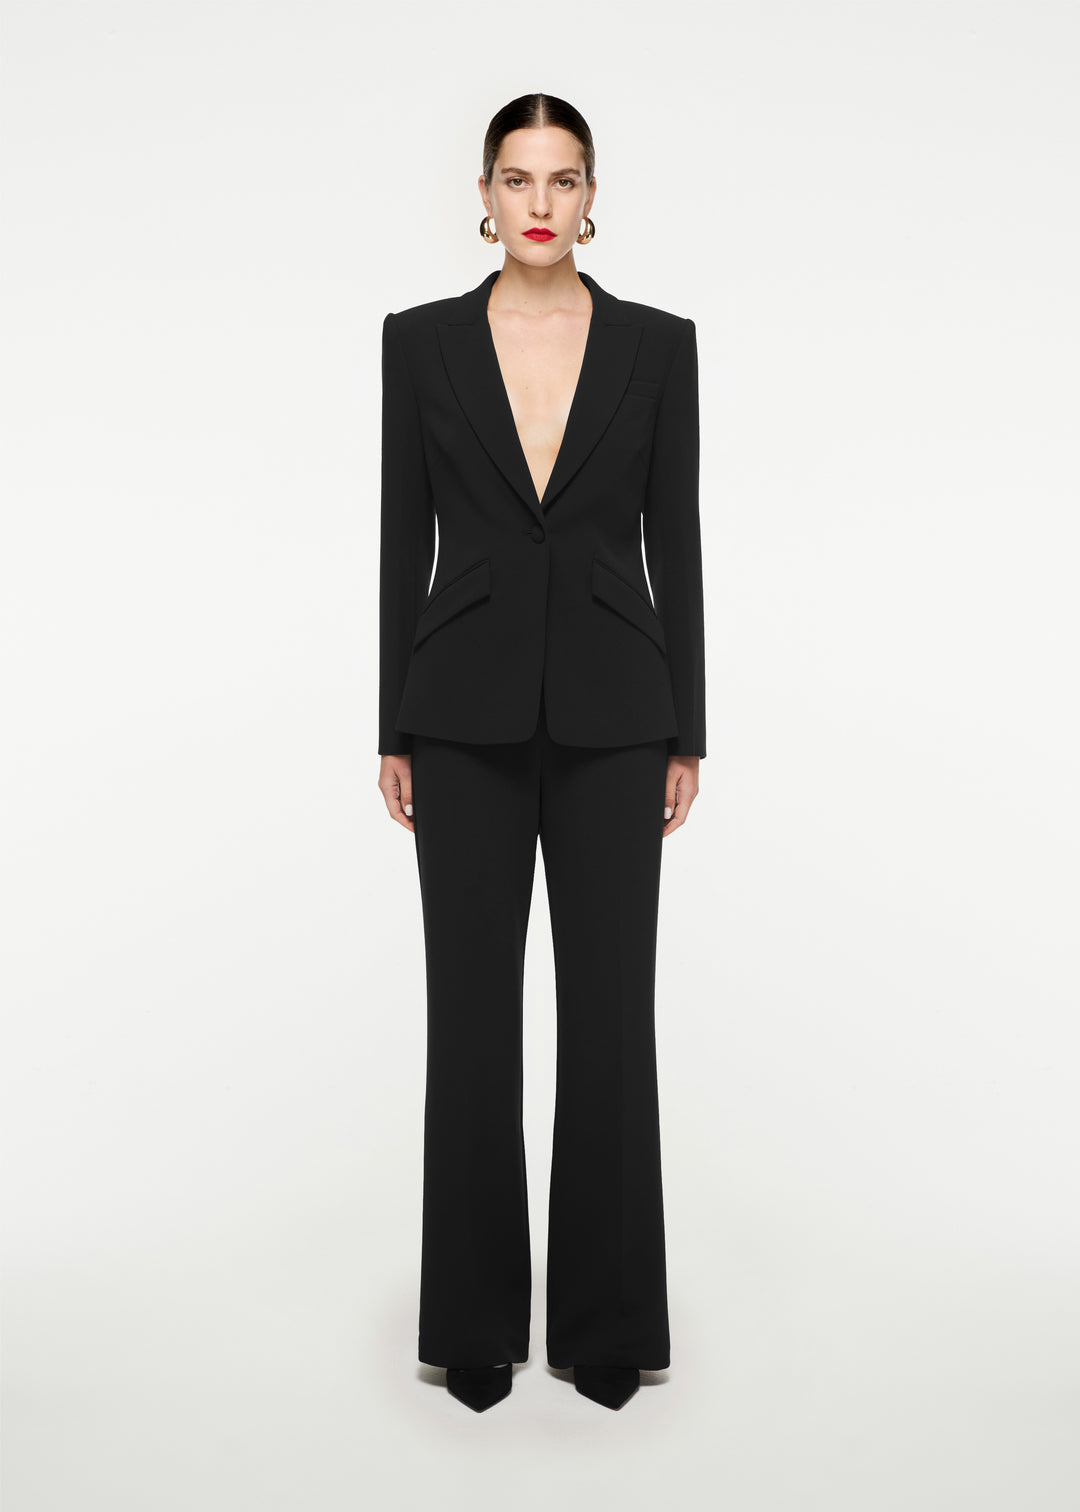 Designer Outerwear and Tailoring for Women – Roland Mouret